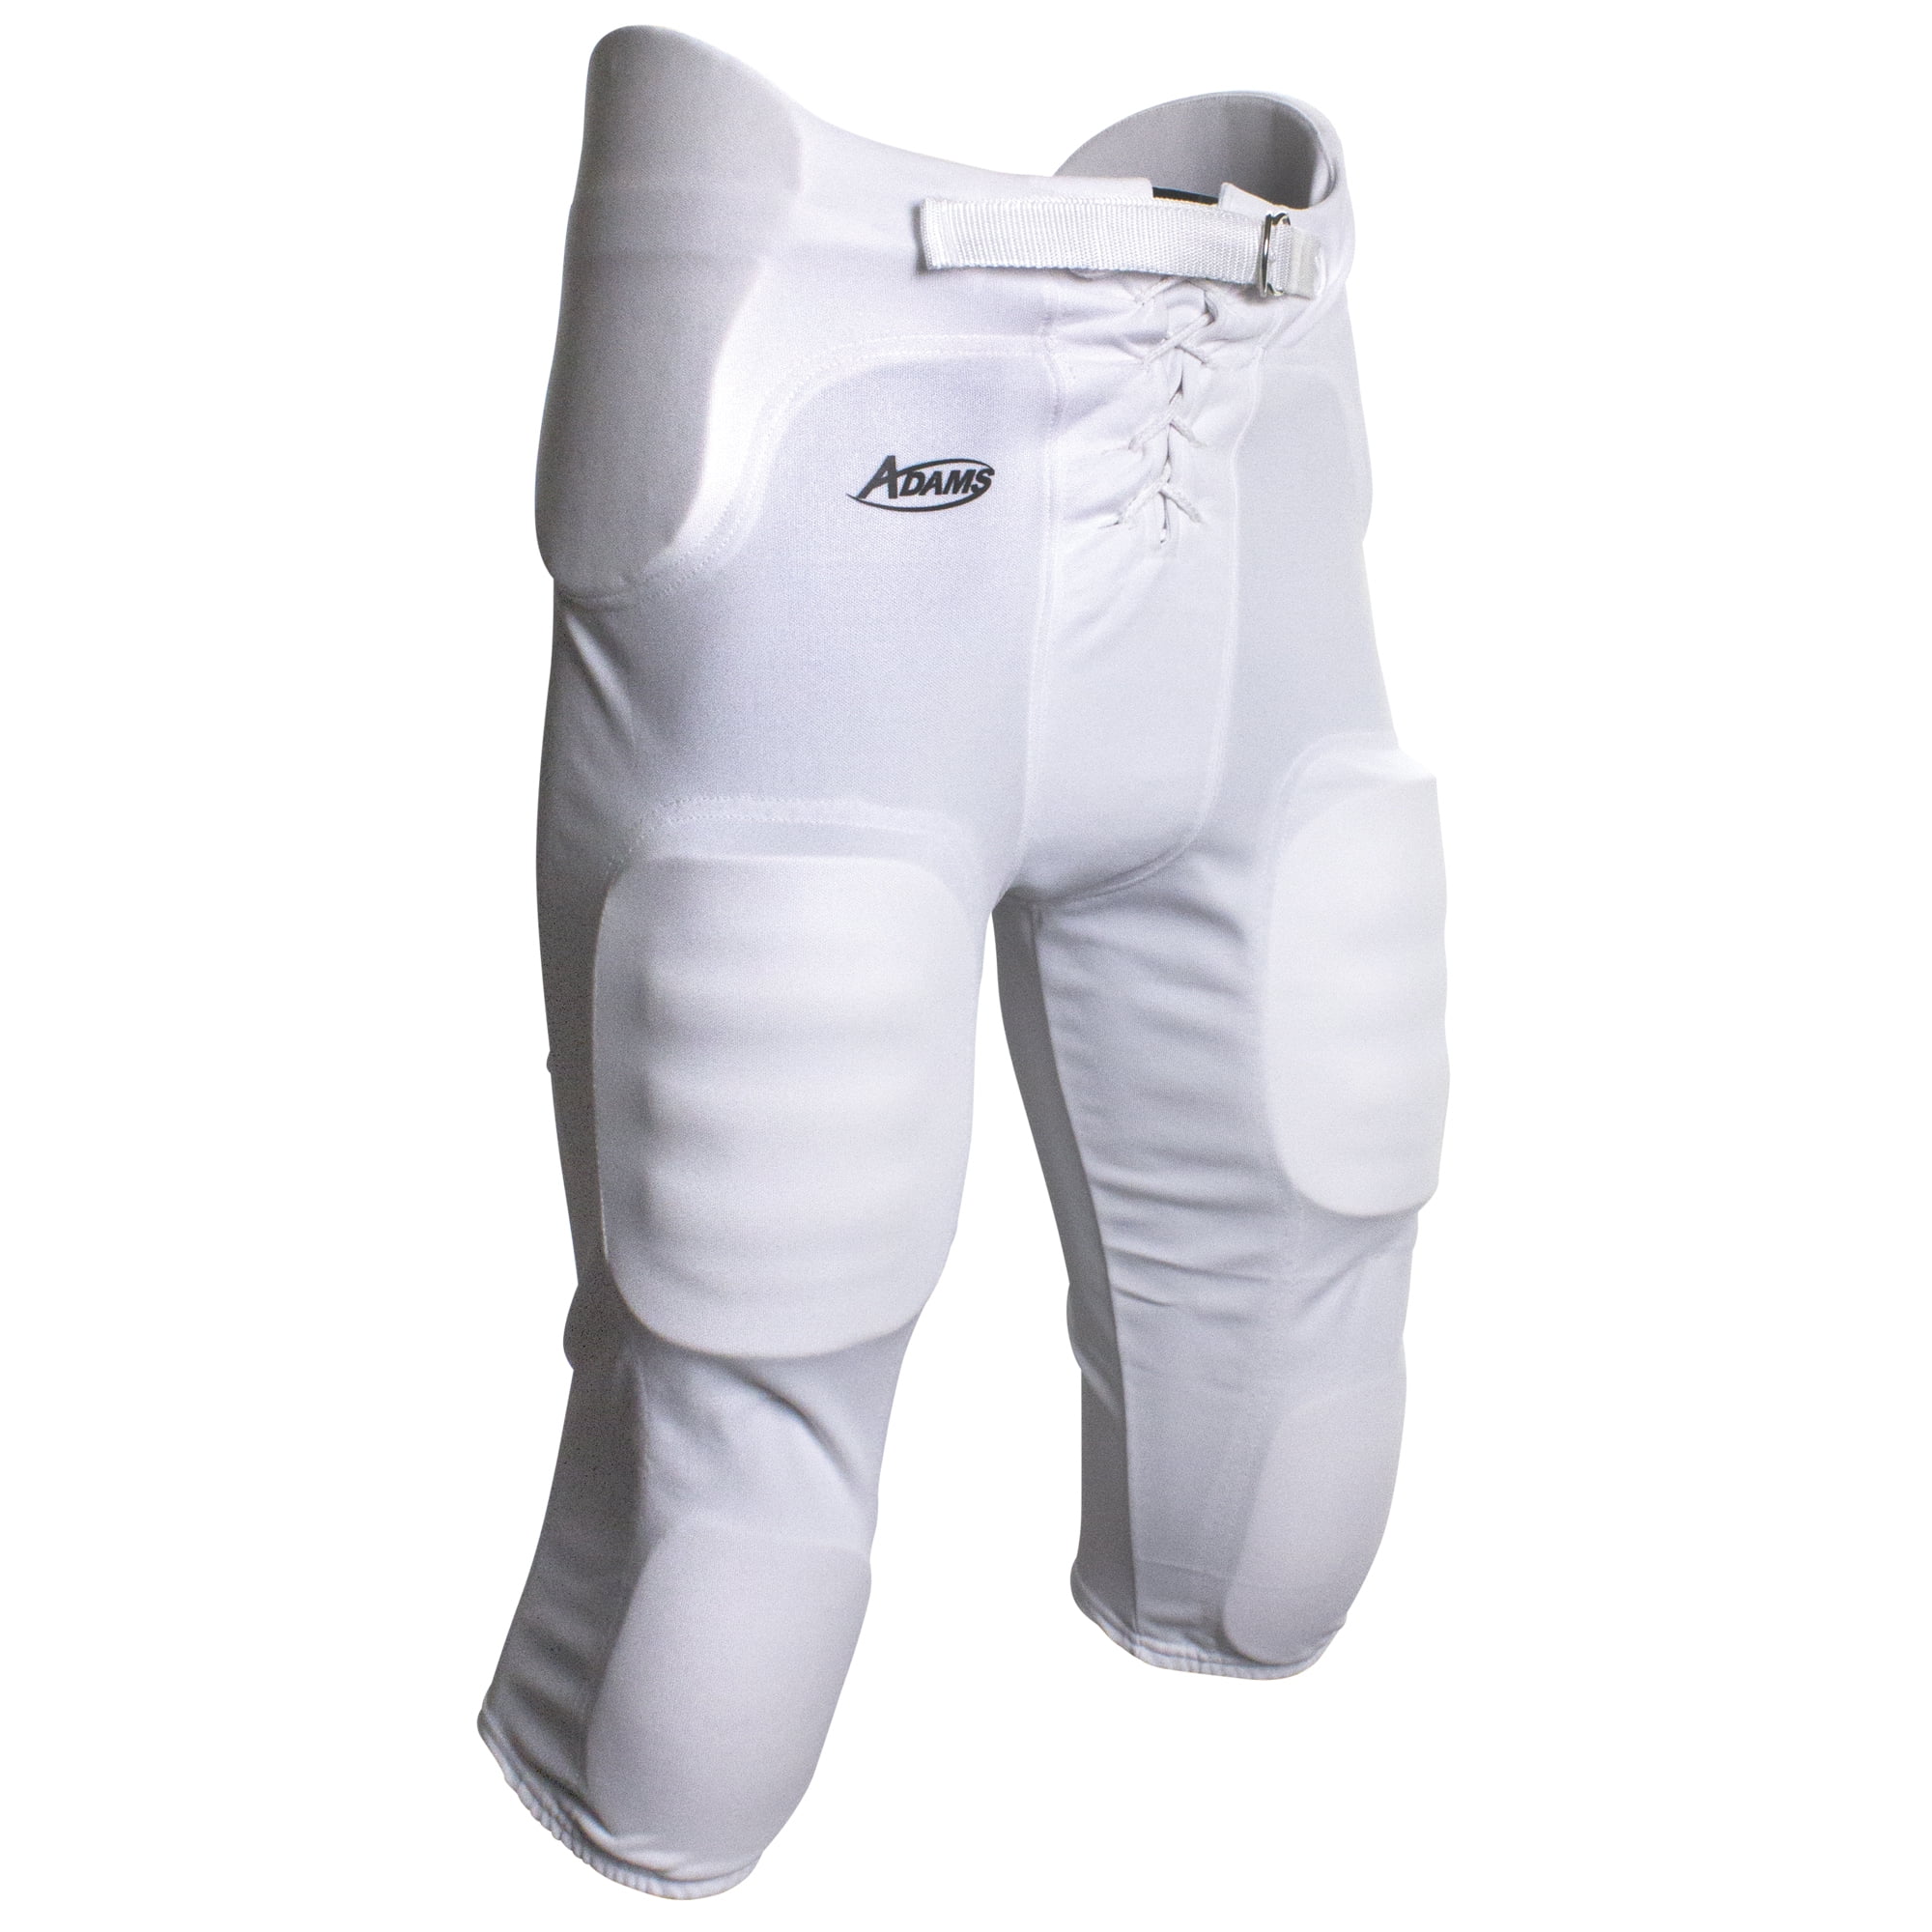 5 Pairs All Size Y2XL Lot Sale NWT Slotted Adams Youth White Football Pants 